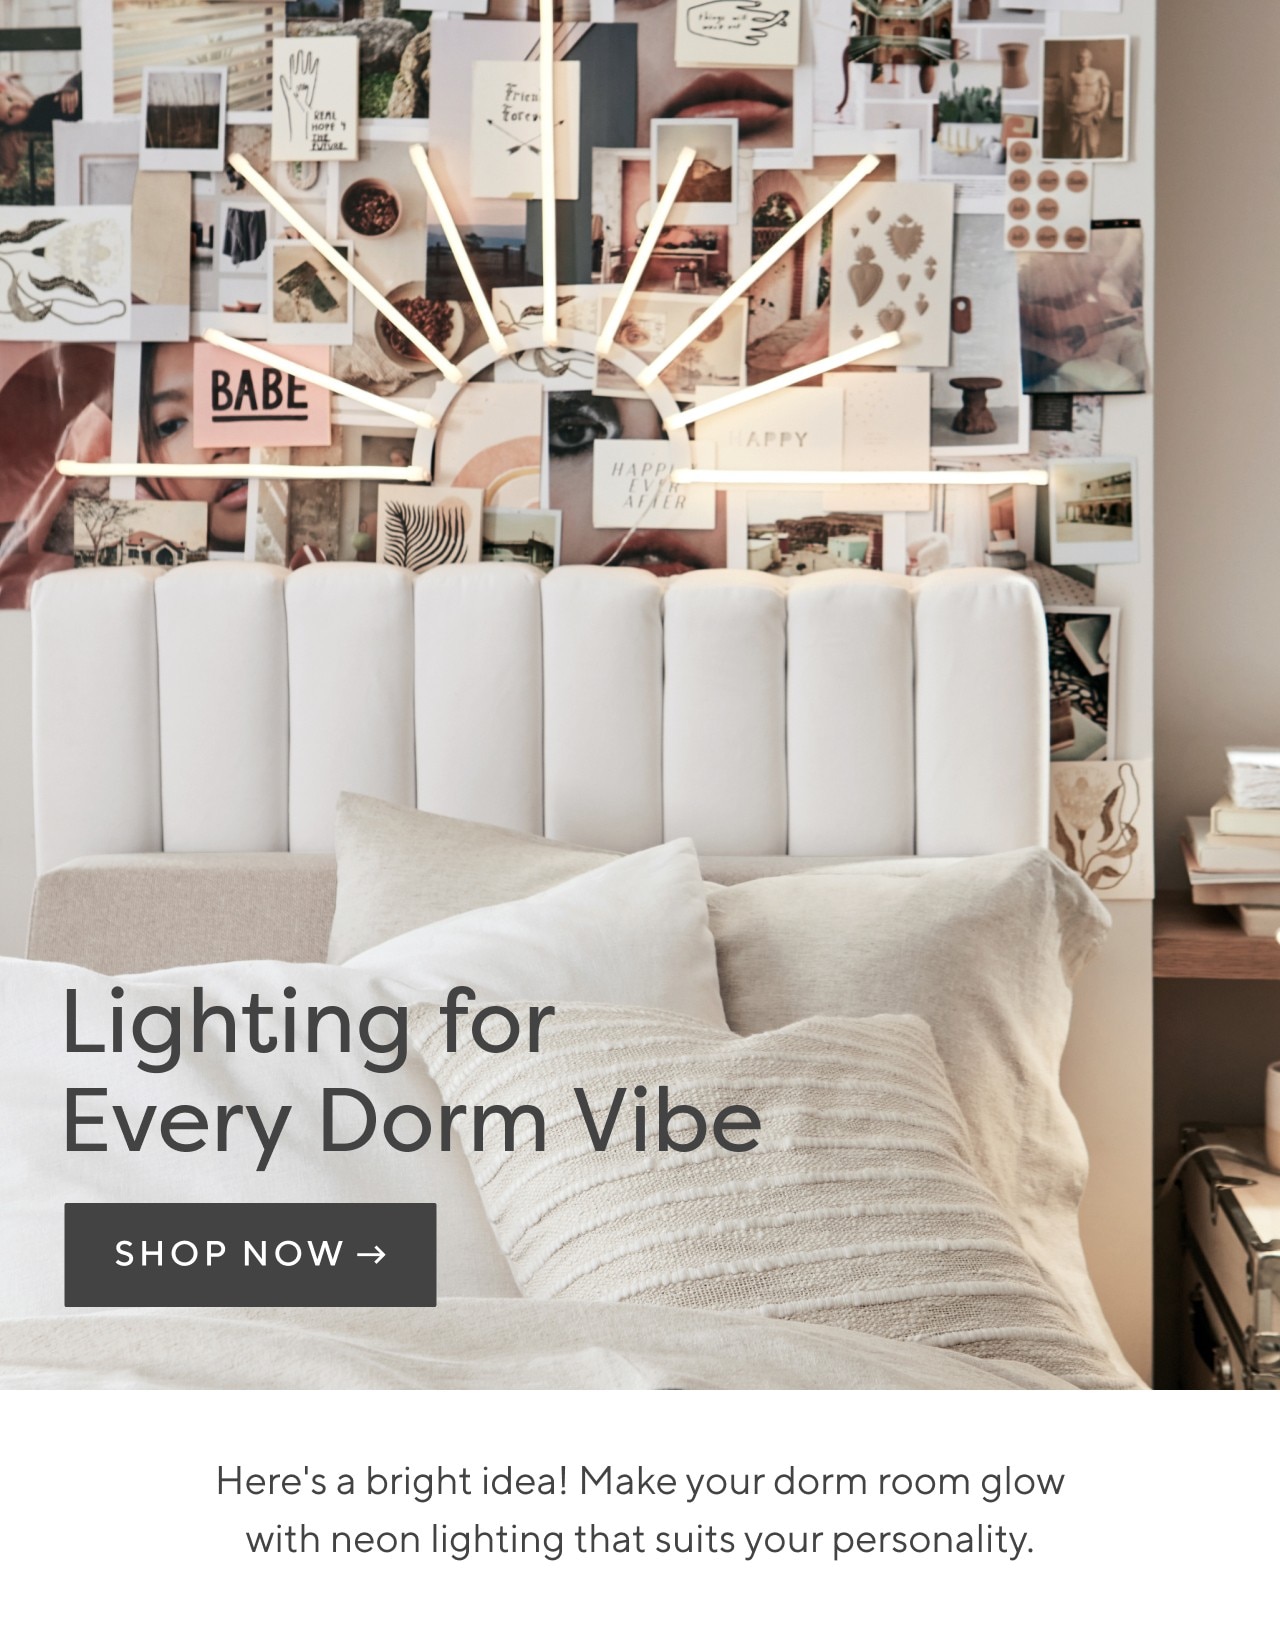 Lighting for every dorm vibe. Shop now